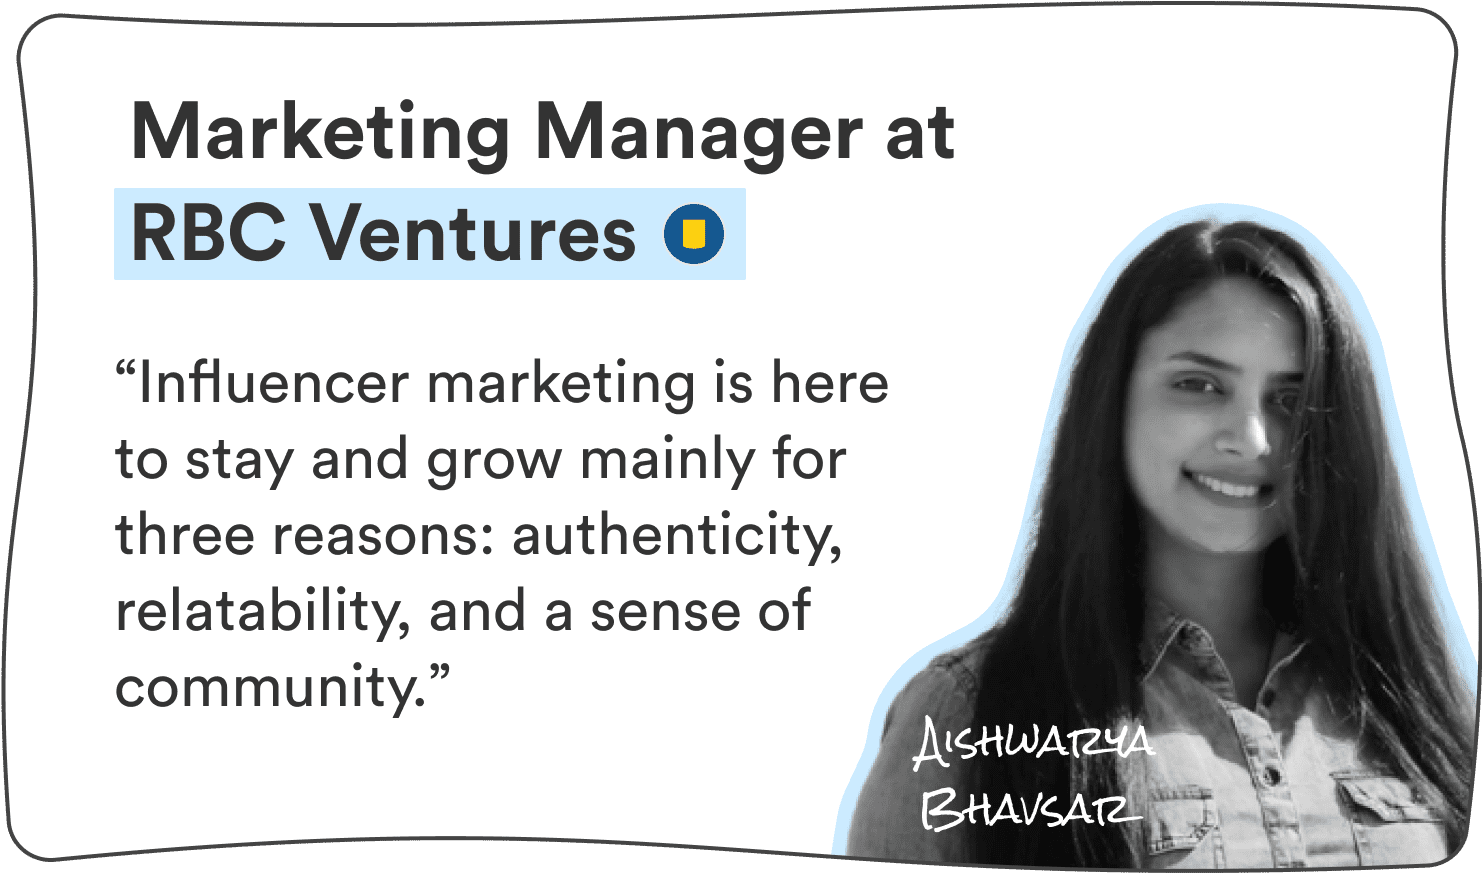 Aishwarya Bhavsar, Marketing Manager at RBC Ventures: “Influencer marketing is here to stay and grow mainly for three reasons: authenticity, relatability, and a sense of community.”